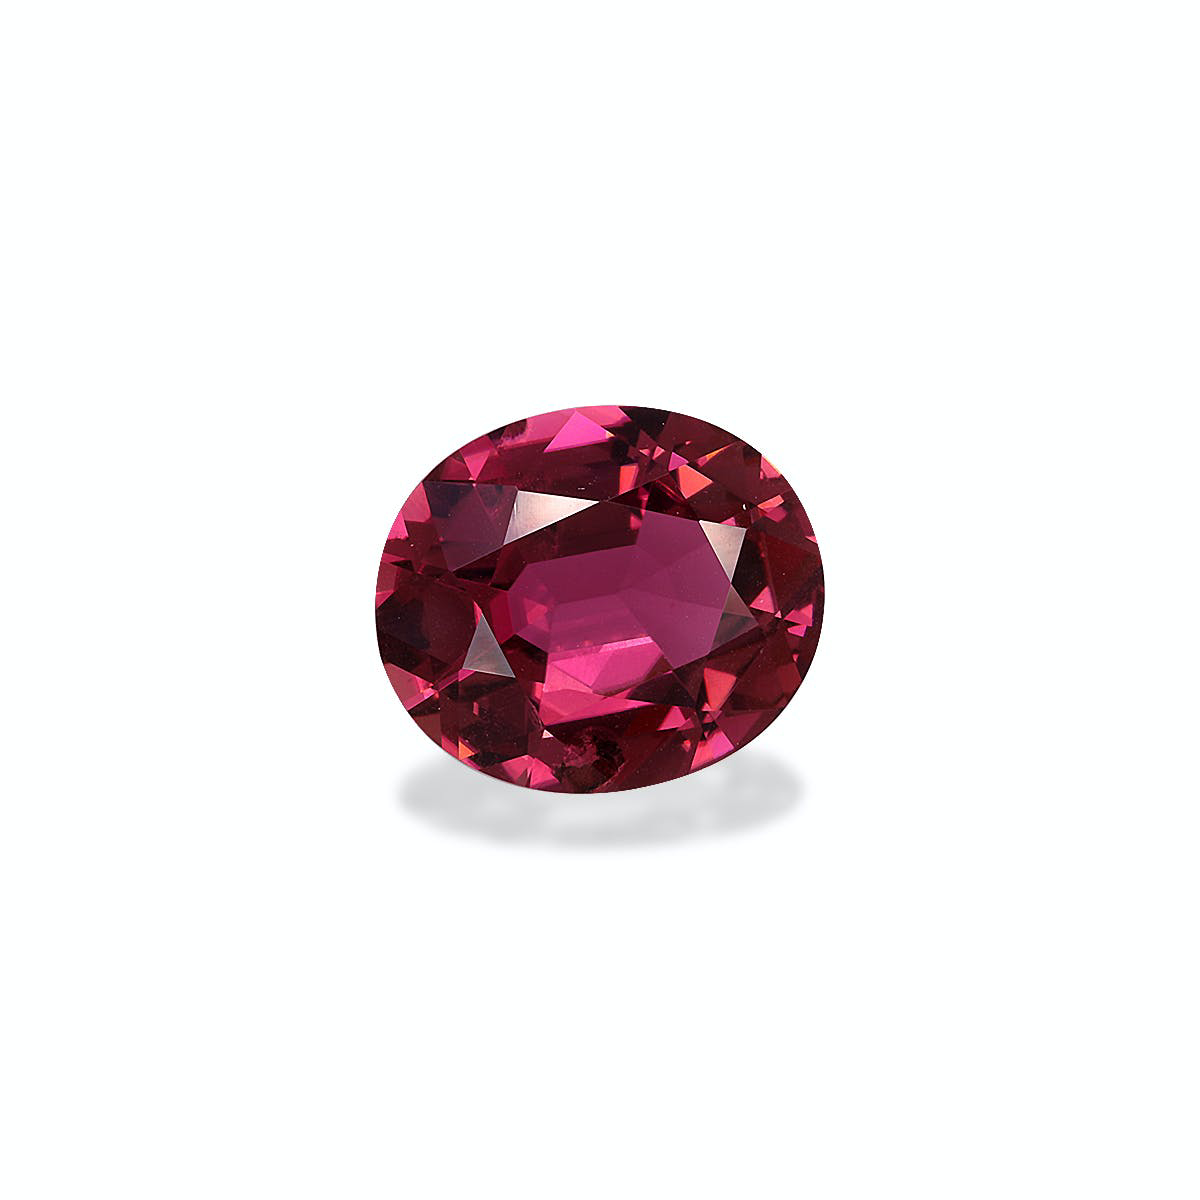 Picture of Rosewood Pink Tourmaline 5.64ct - 13x11mm (PT1214)